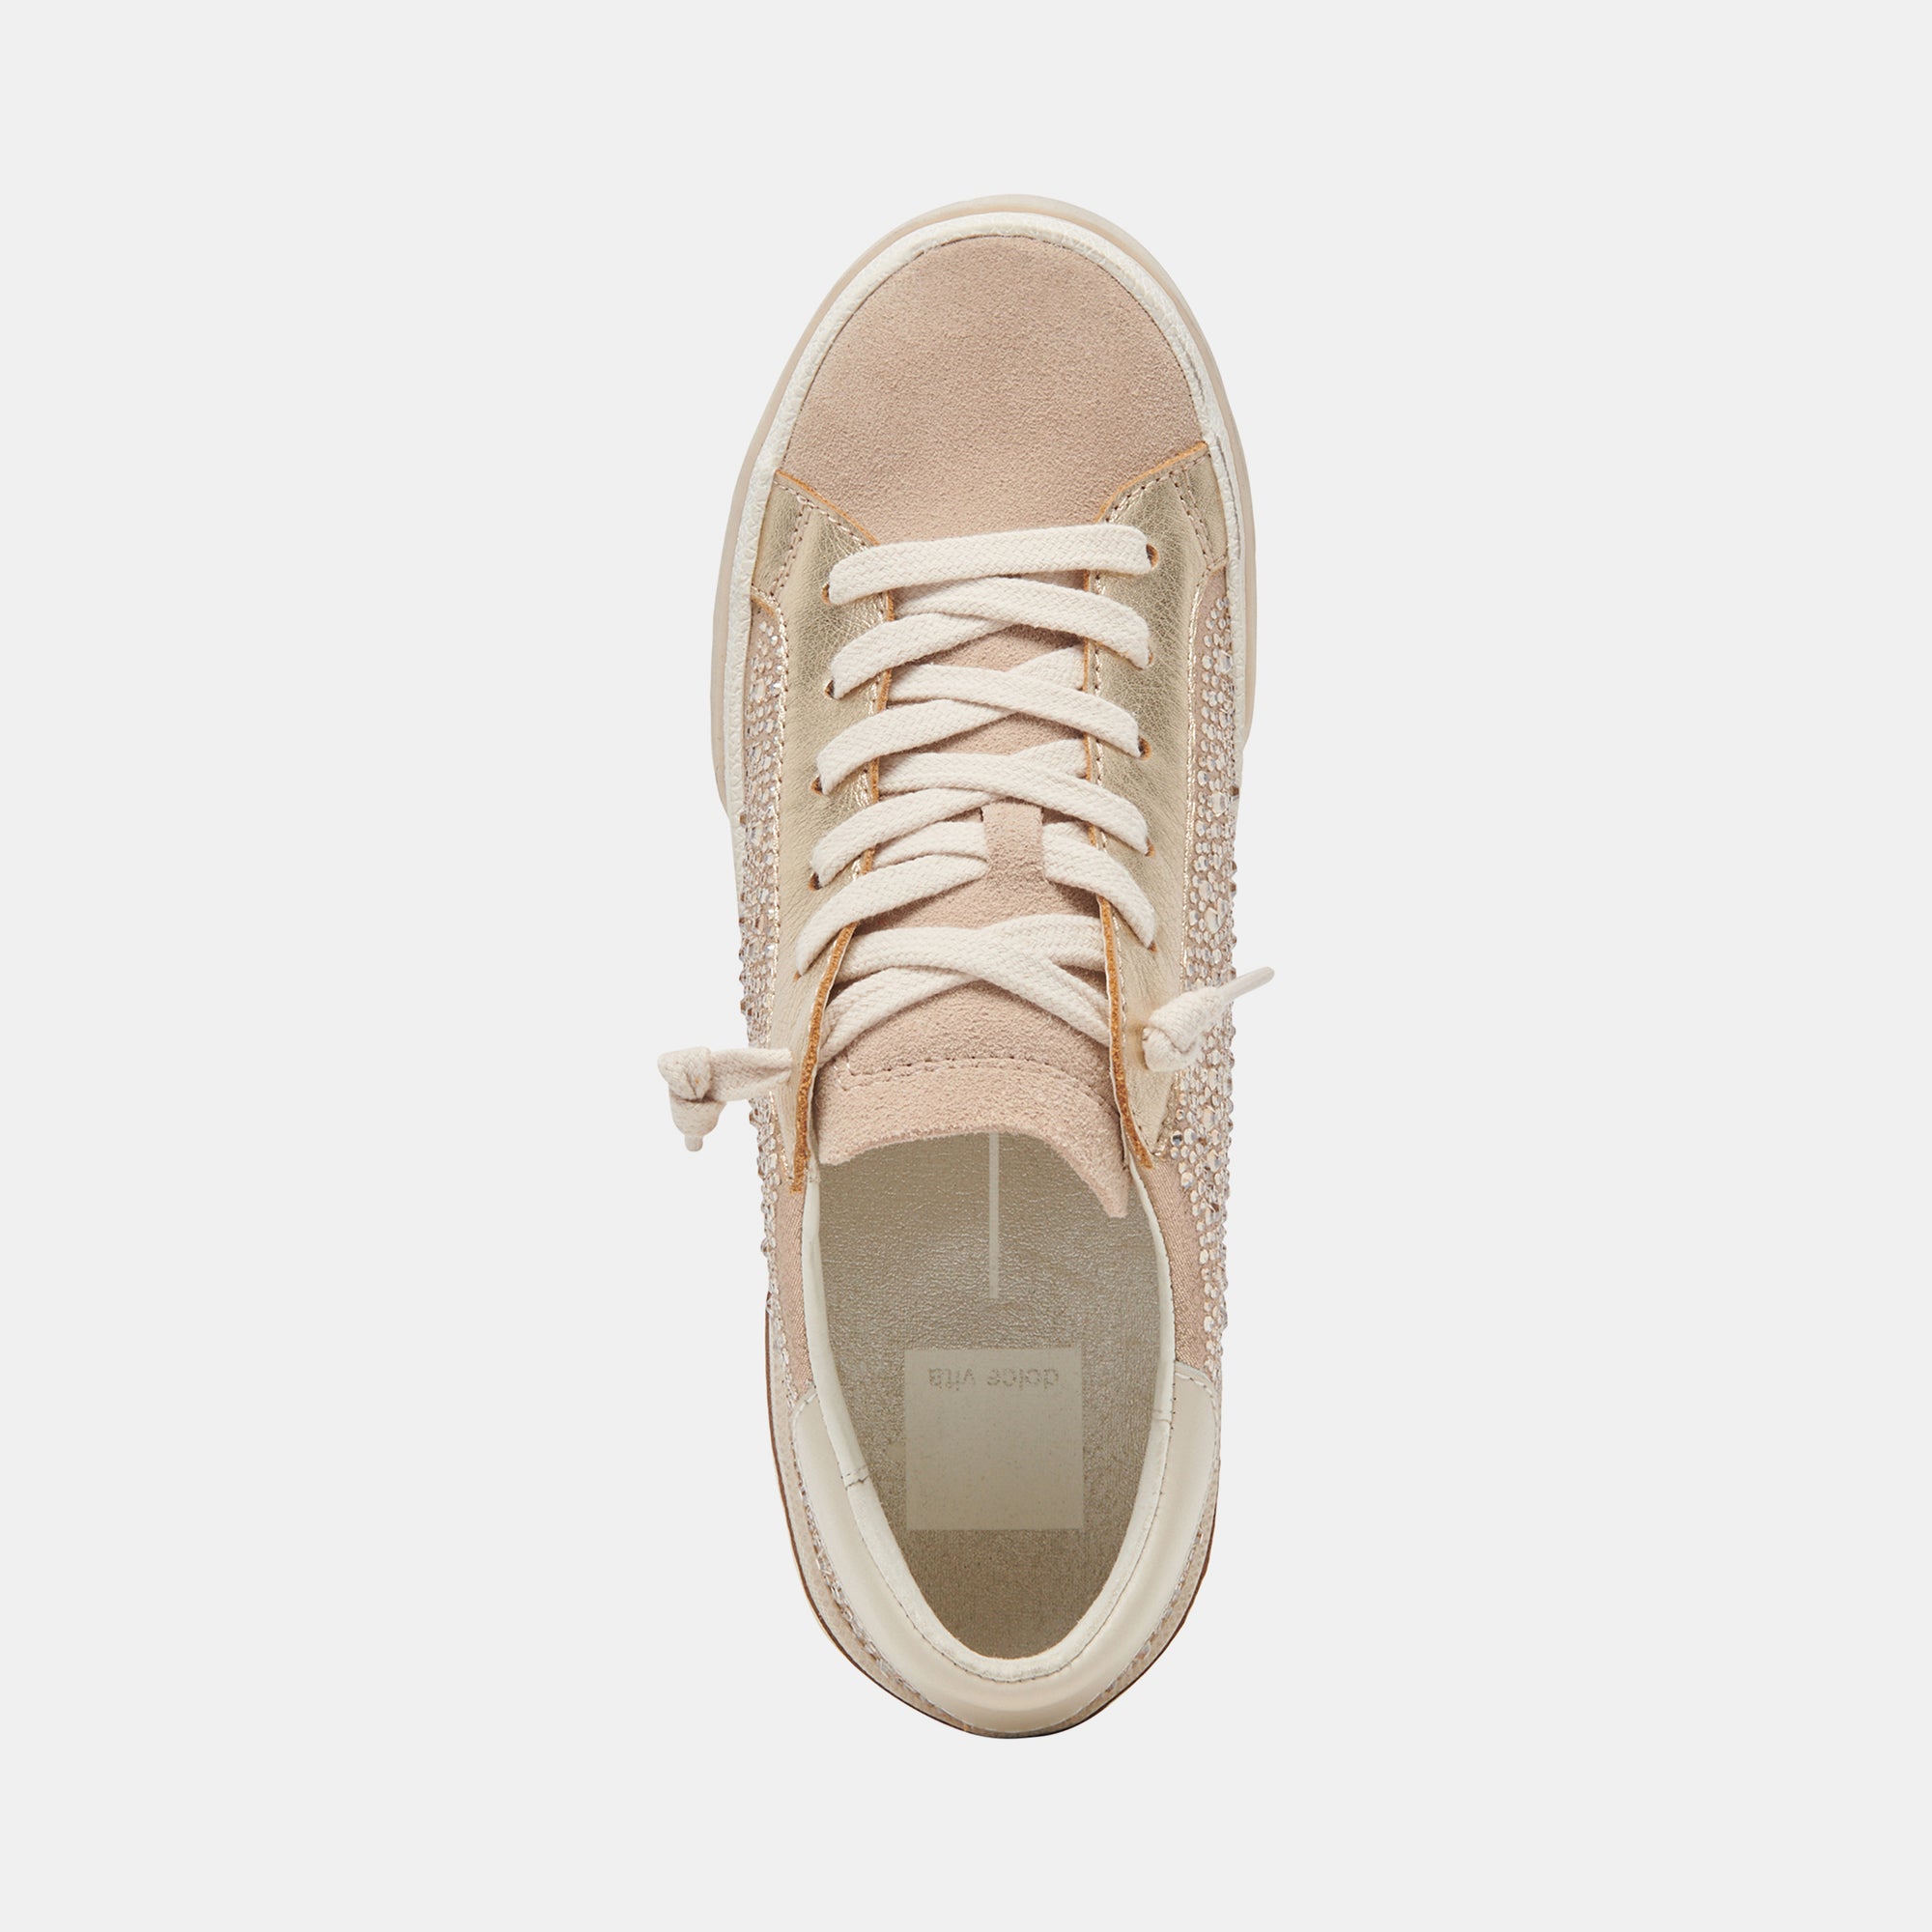 ZINA CRYSTAL SNEAKERS GOLD SUEDE – Dolce Vita